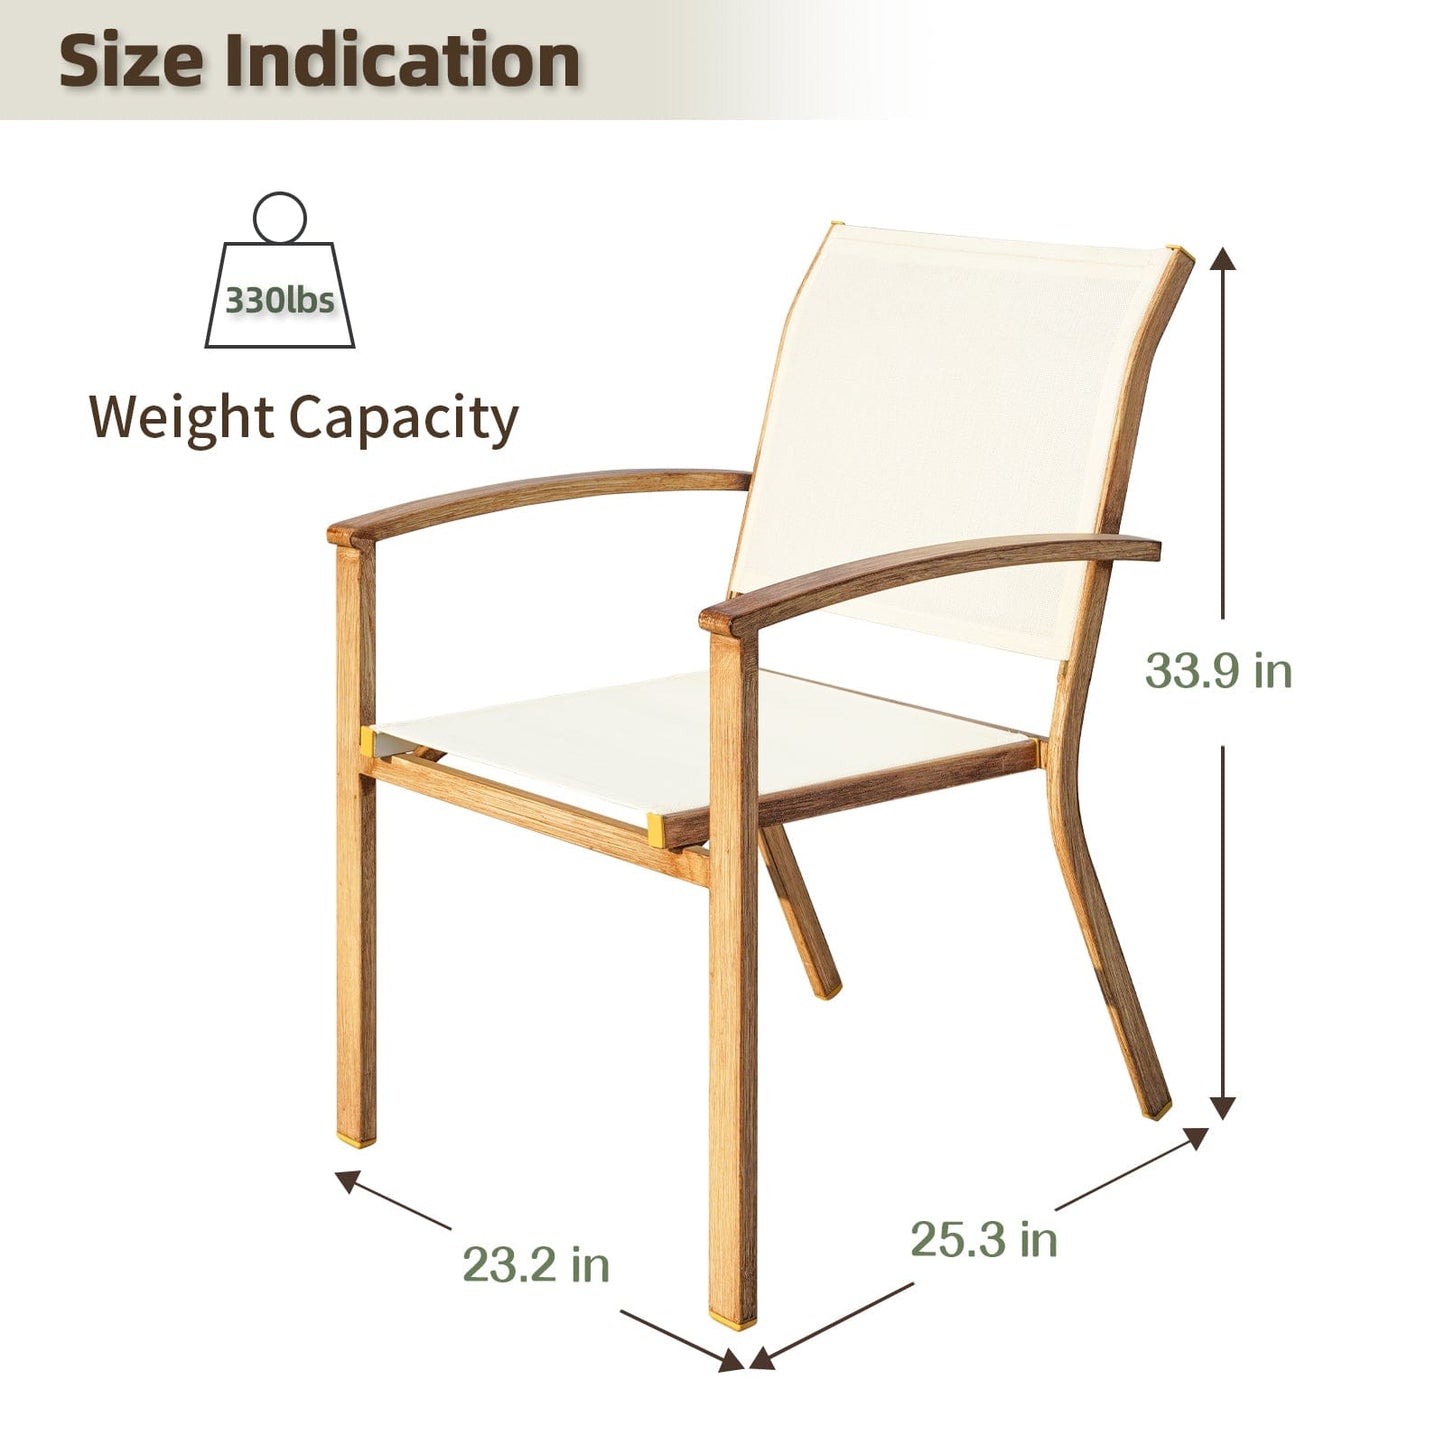 NADADI-2D-patio-chairs-Size-indication